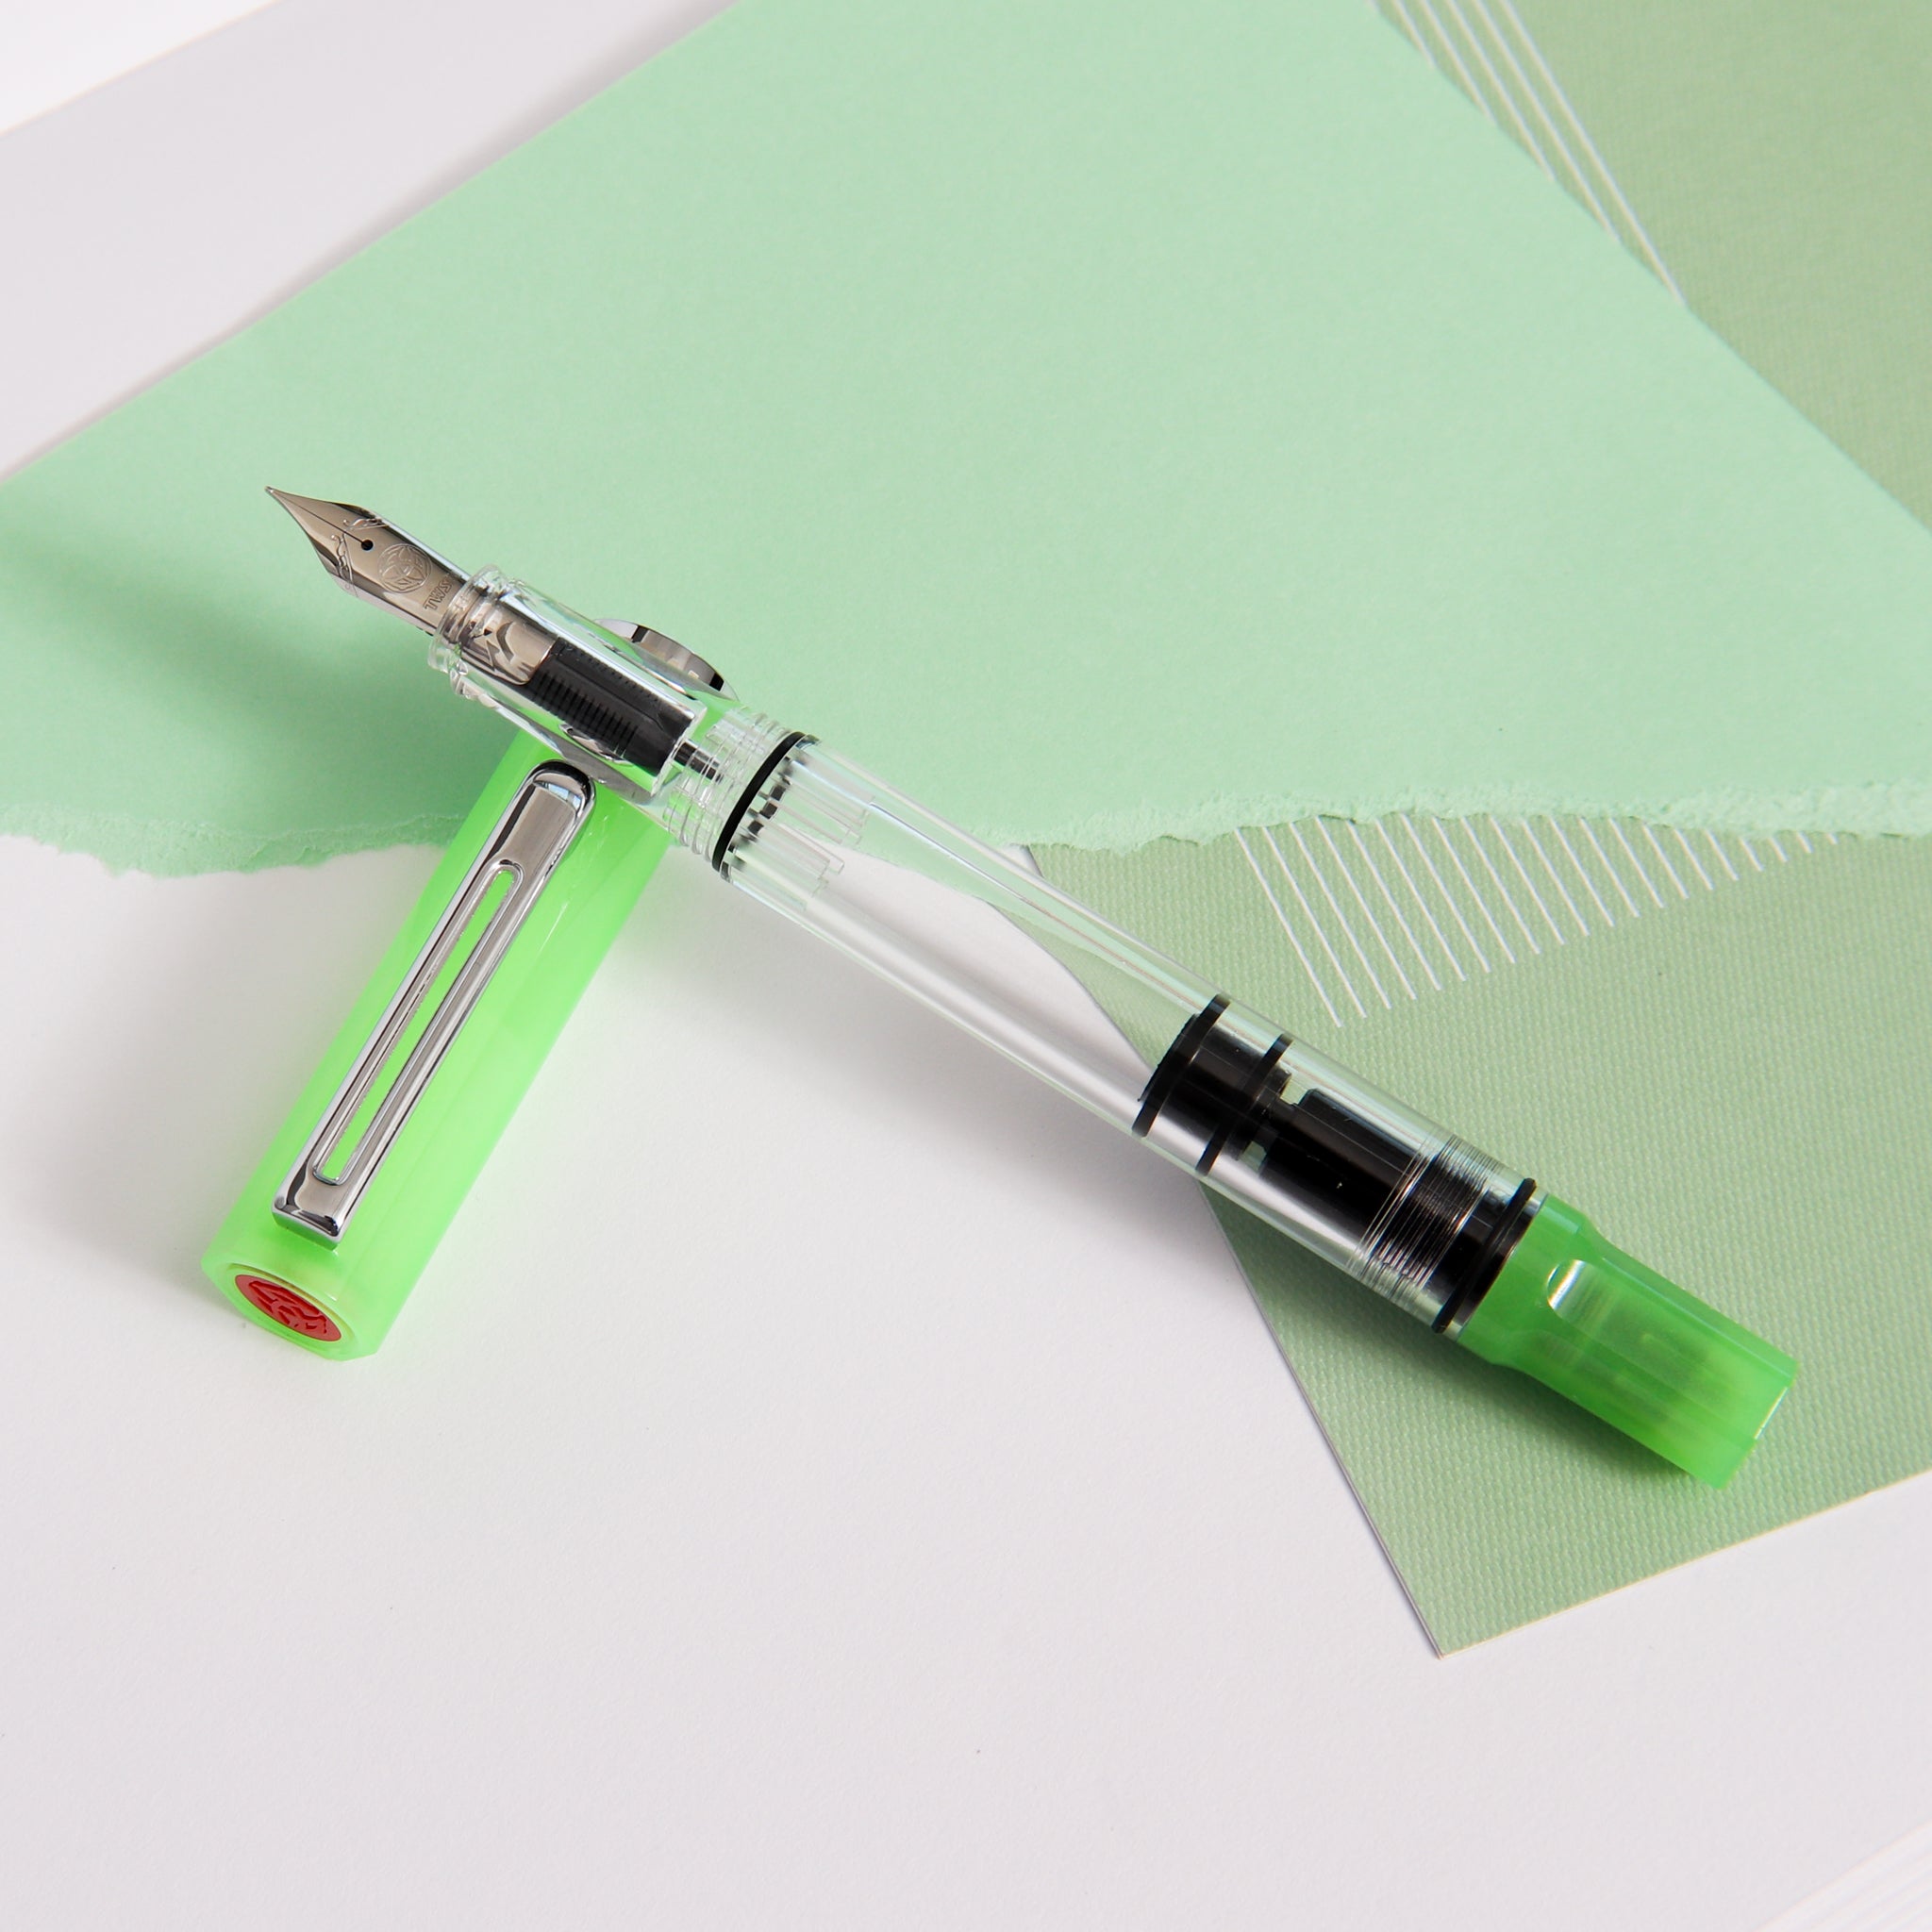 TWSBI Brand Overview - The Goulet Pen Company